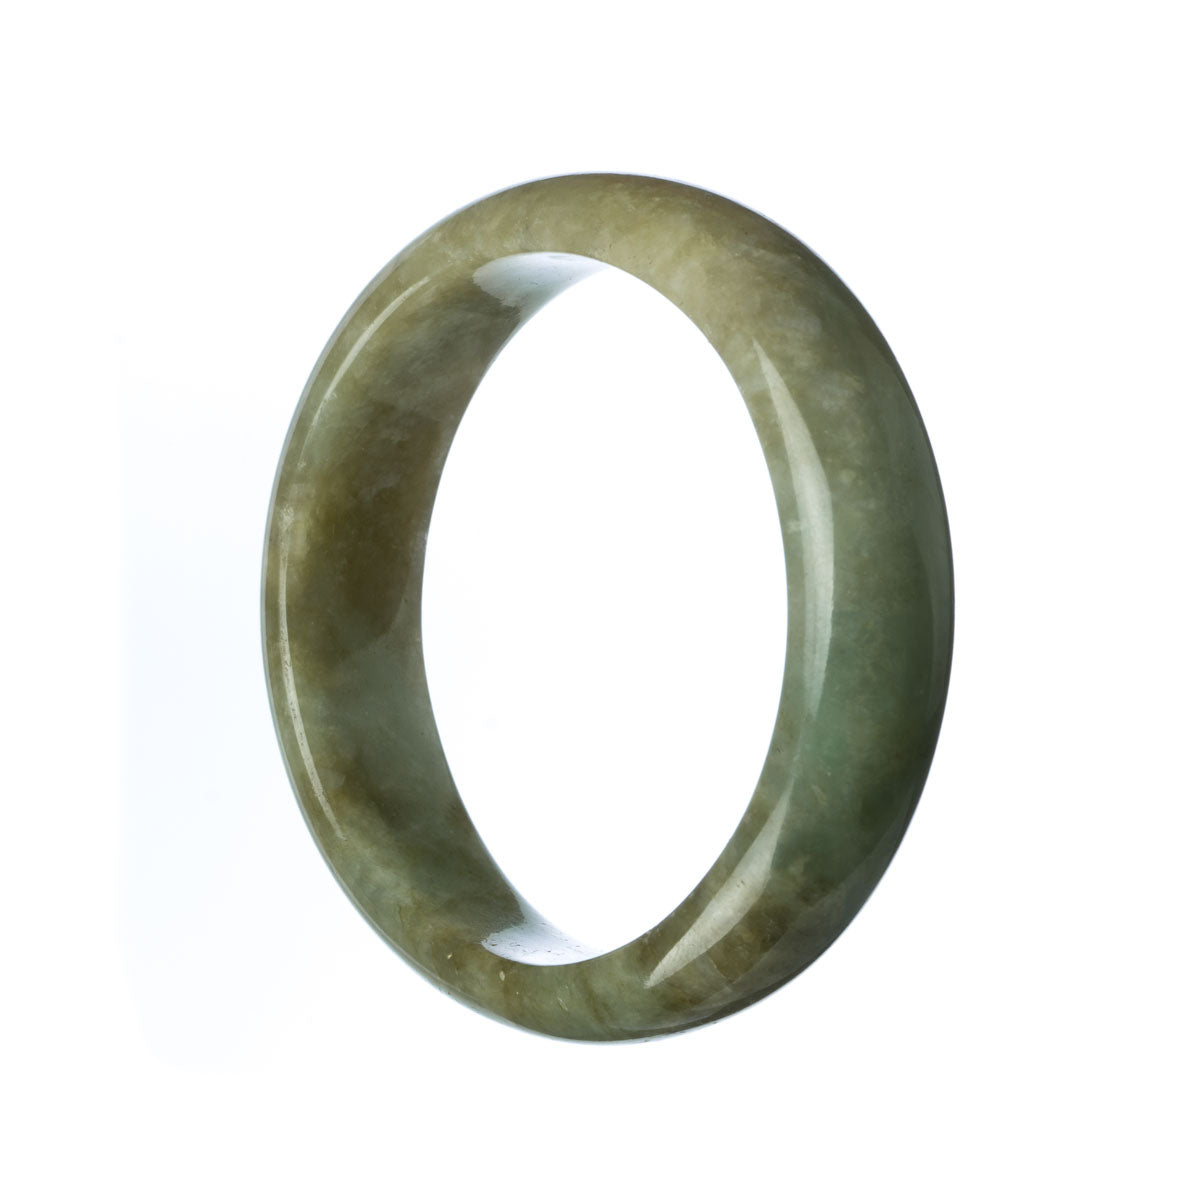 A close-up of a real untreated green-brown jadeite bracelet with a half moon shape, measuring 58mm. Exquisite and natural, this piece is offered by MAYS GEMS.